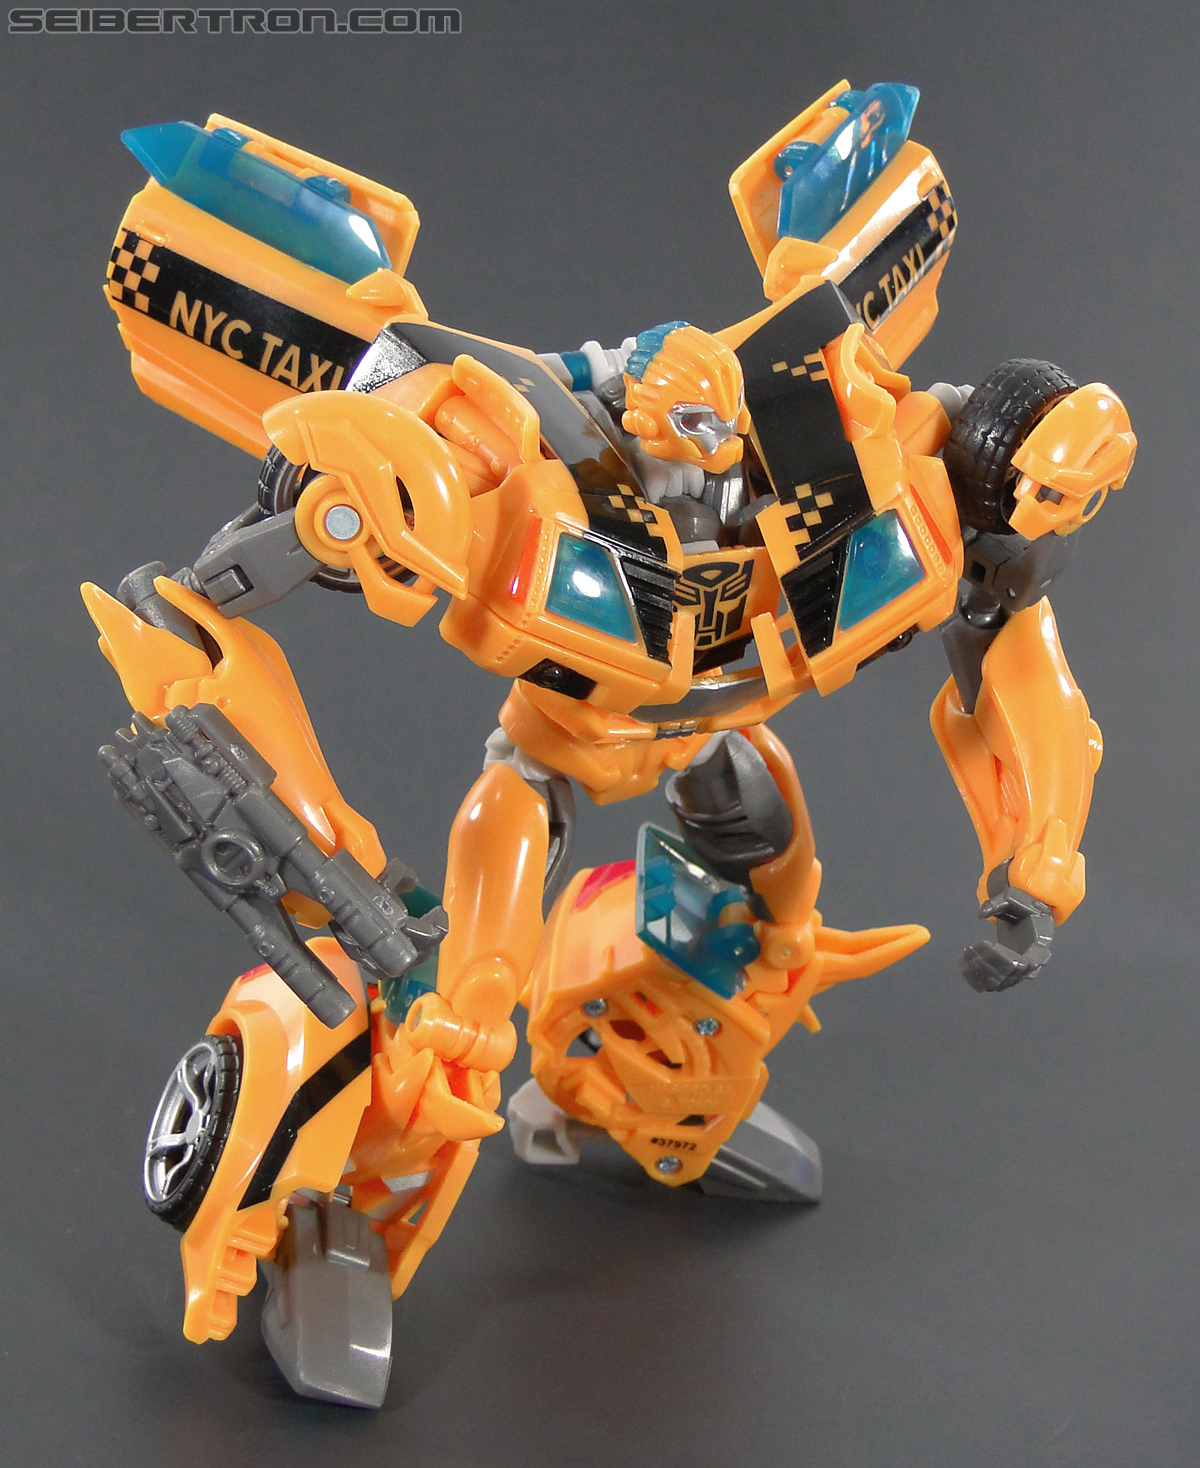 Transformers Prime: First Edition Bumblebee (NYCC) (Image #147 of 185)